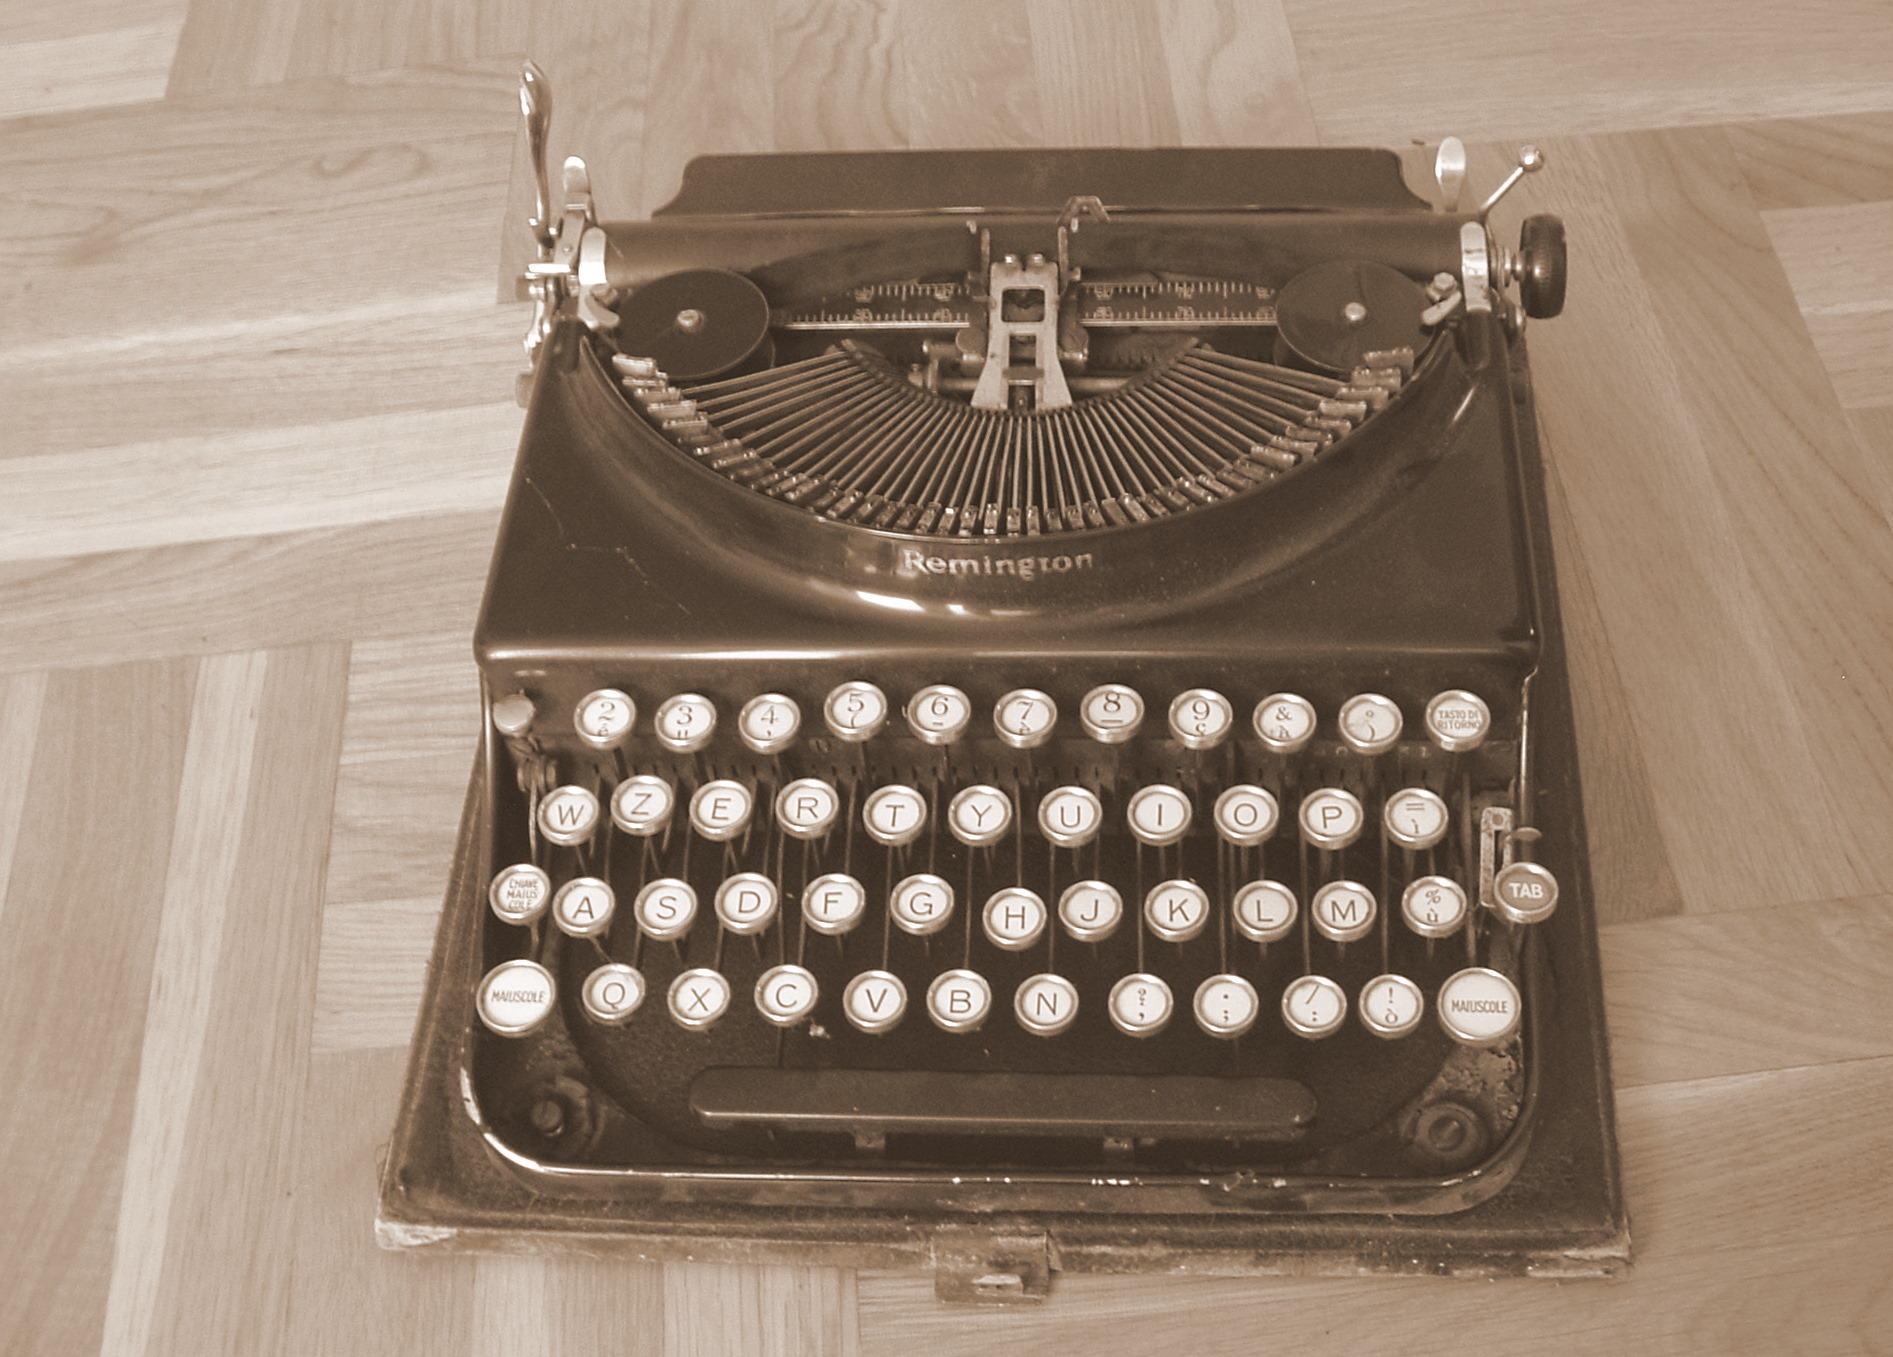 an old fashioned black and white typewriter on the floor